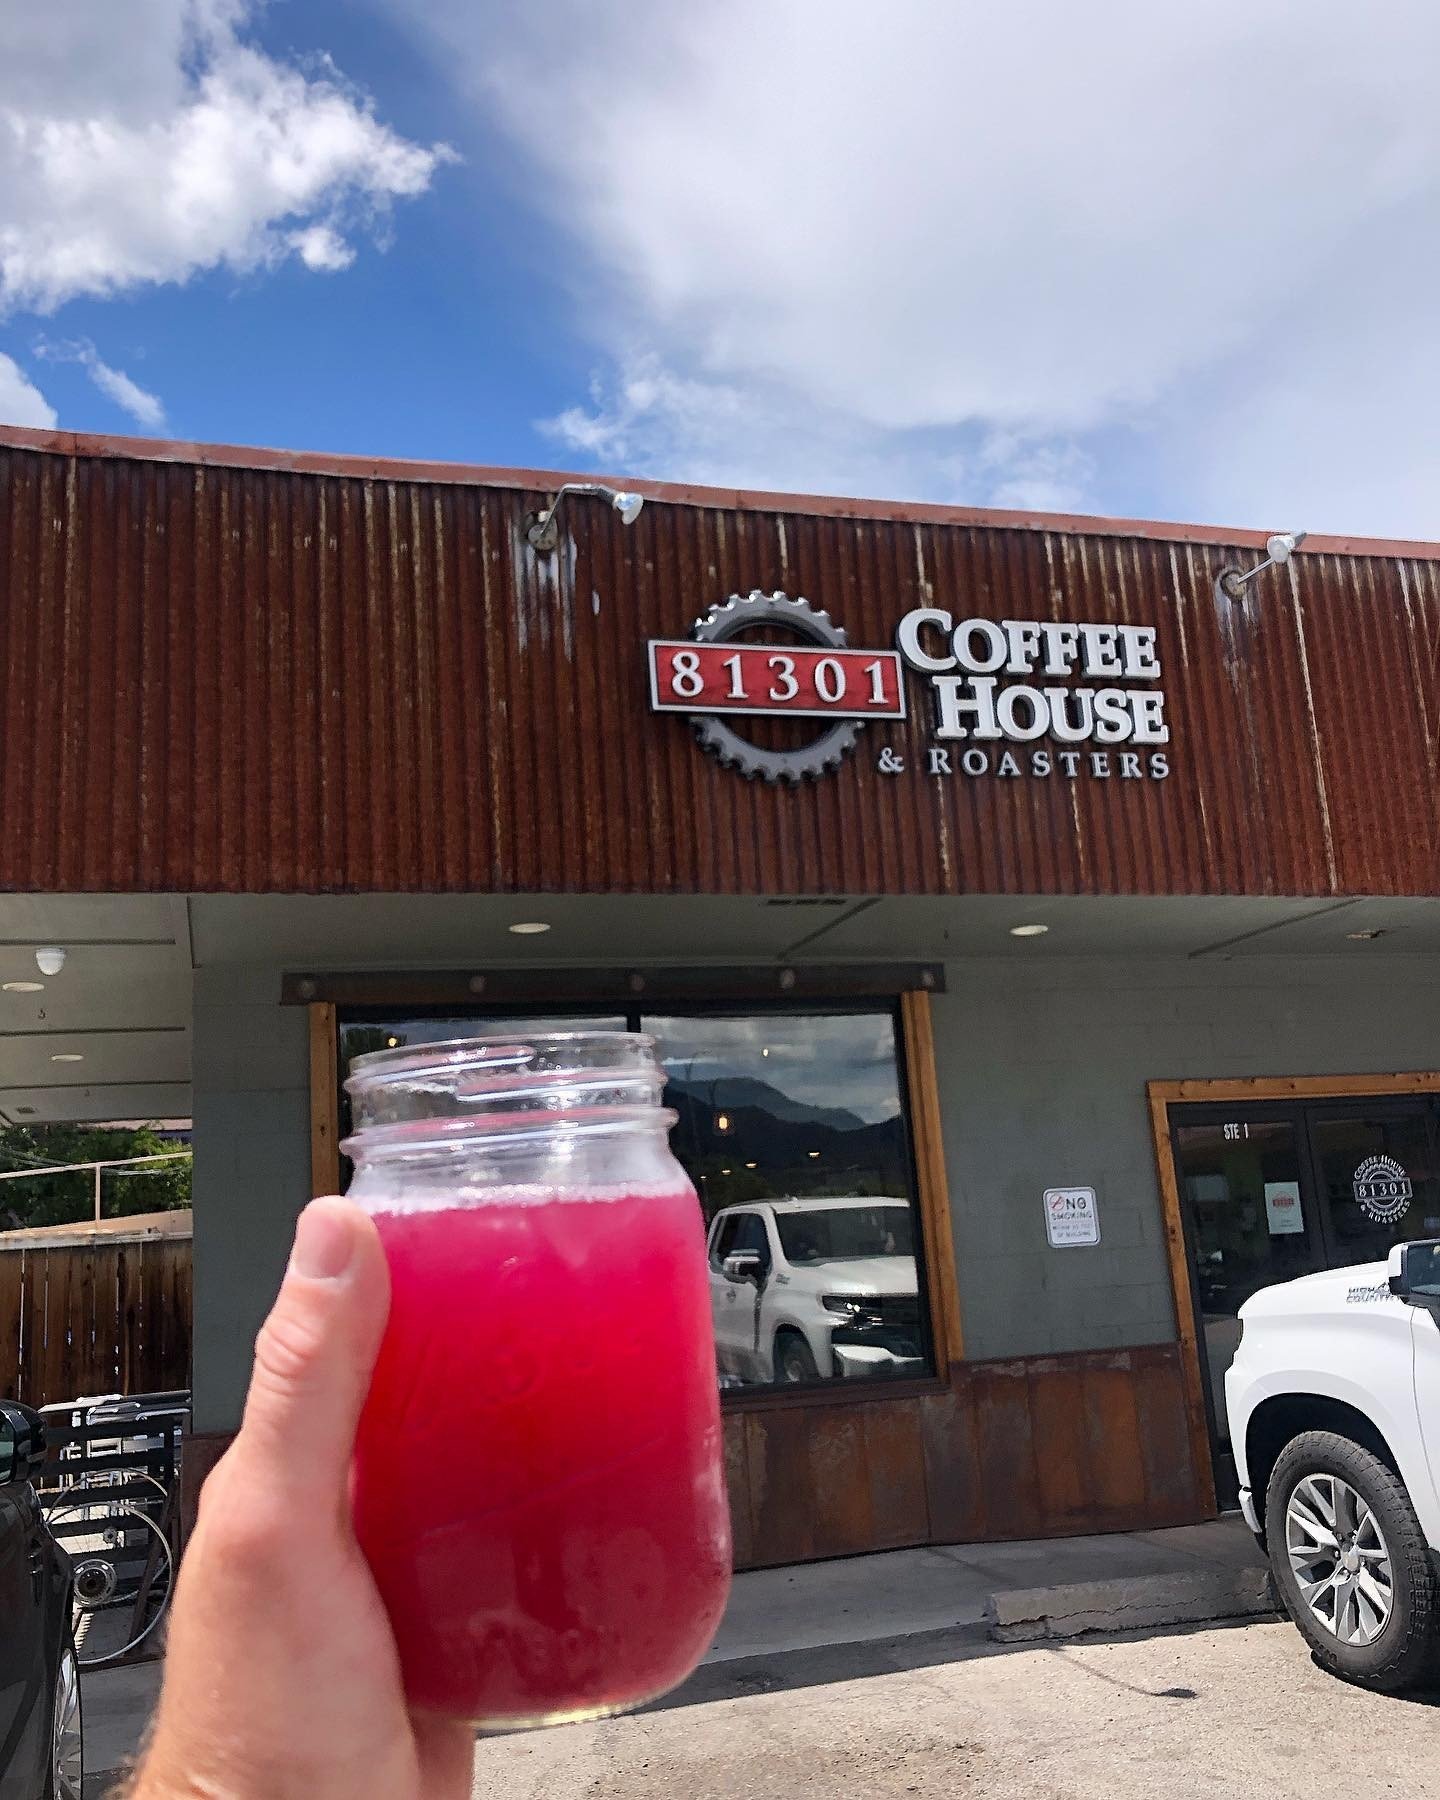 One of Durango Valley View's favorite 'local' coffee shops also happens to be the closest to the house - 7.5 miles or about 10 minutes away. Sometimes we go for an Americano - iced in summer, hot in winter and definitely confusing in the between seas